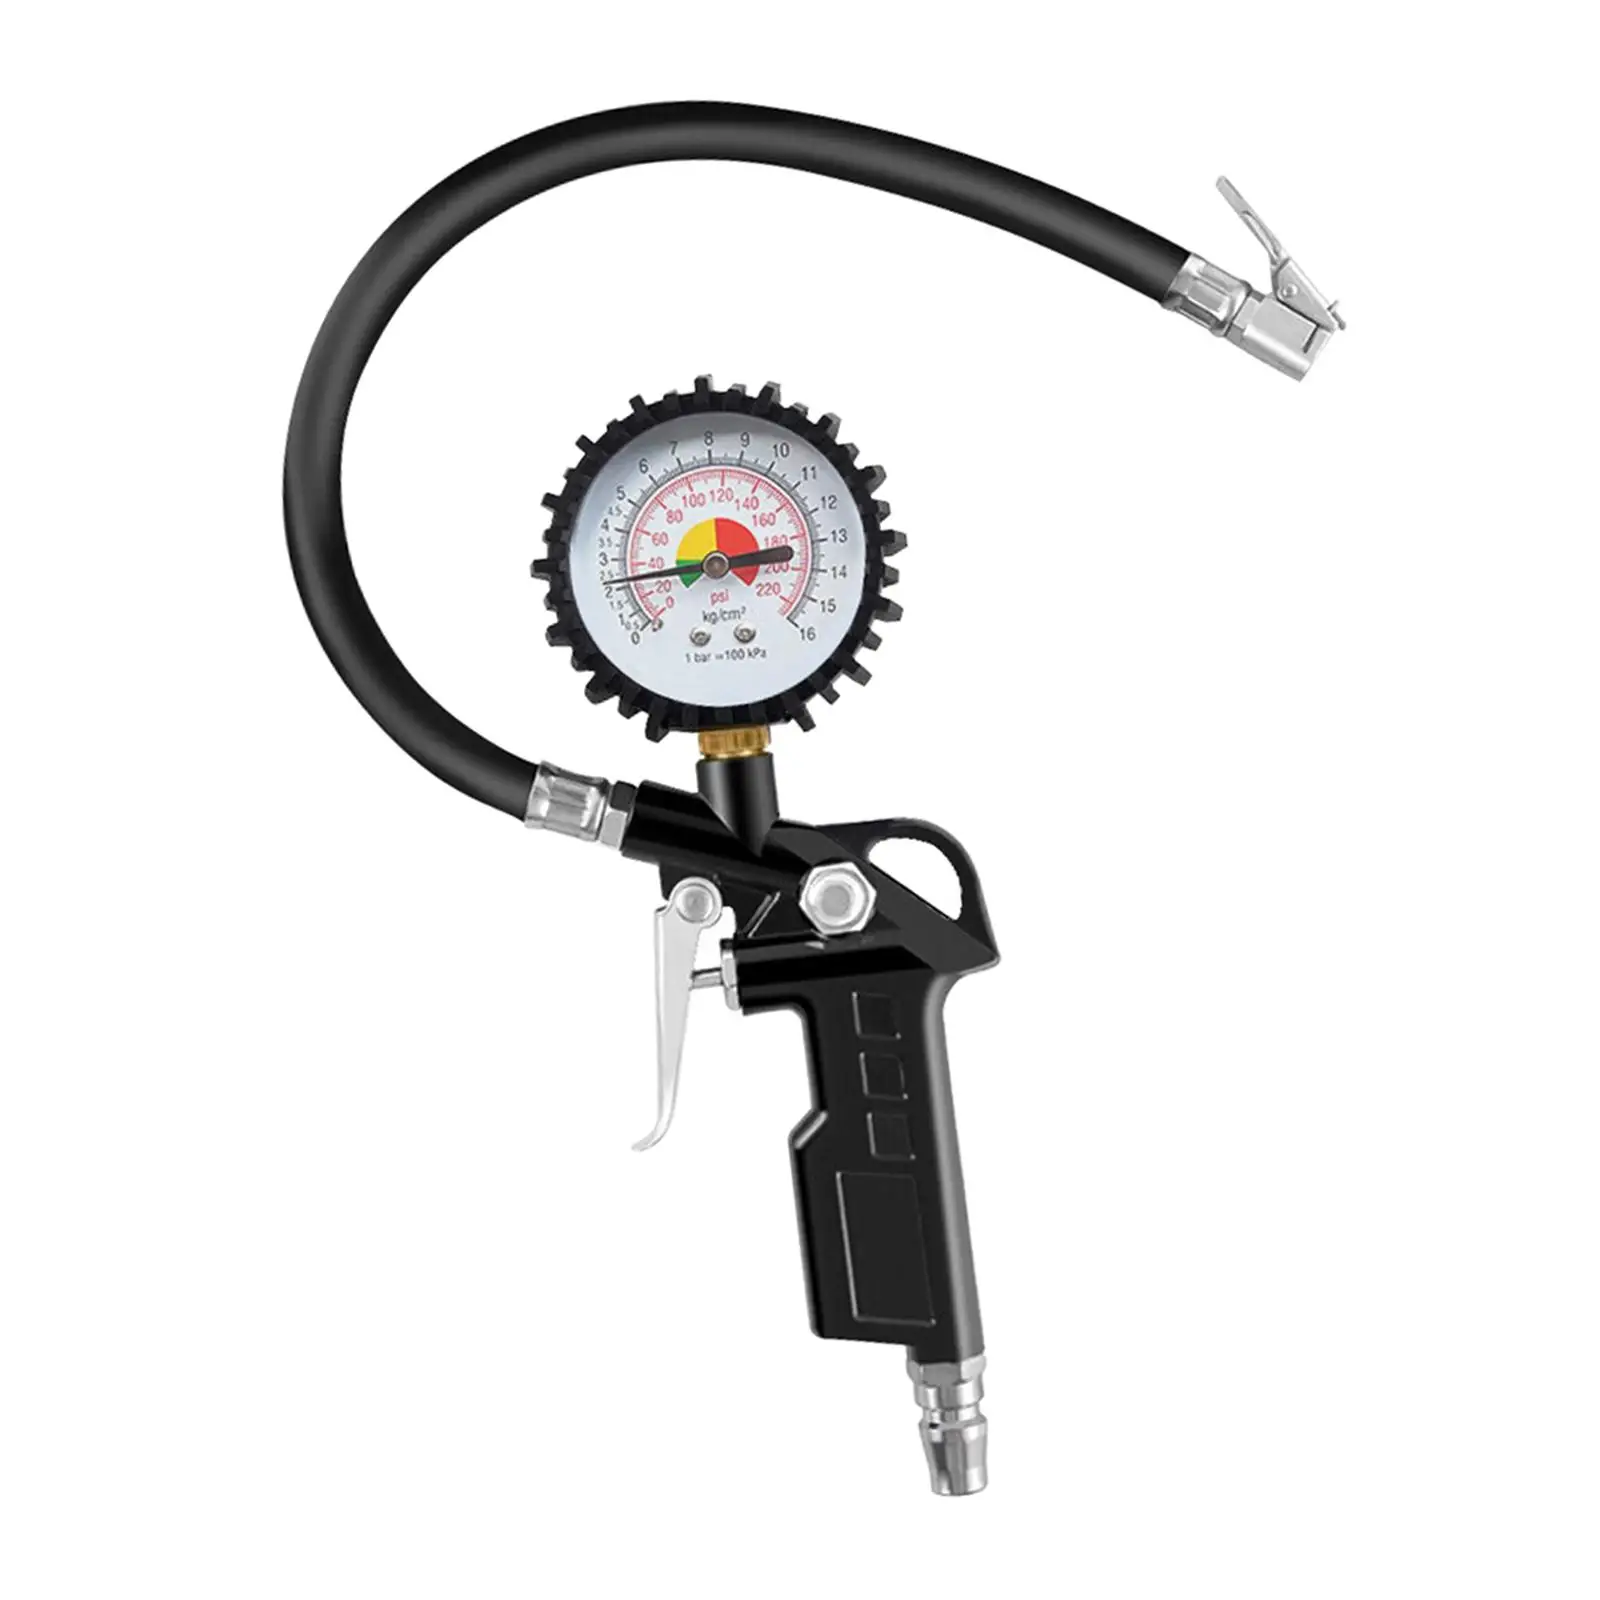 Tire Pressure Gauge Handheld High Precision 0-220PSI for Motorcycle